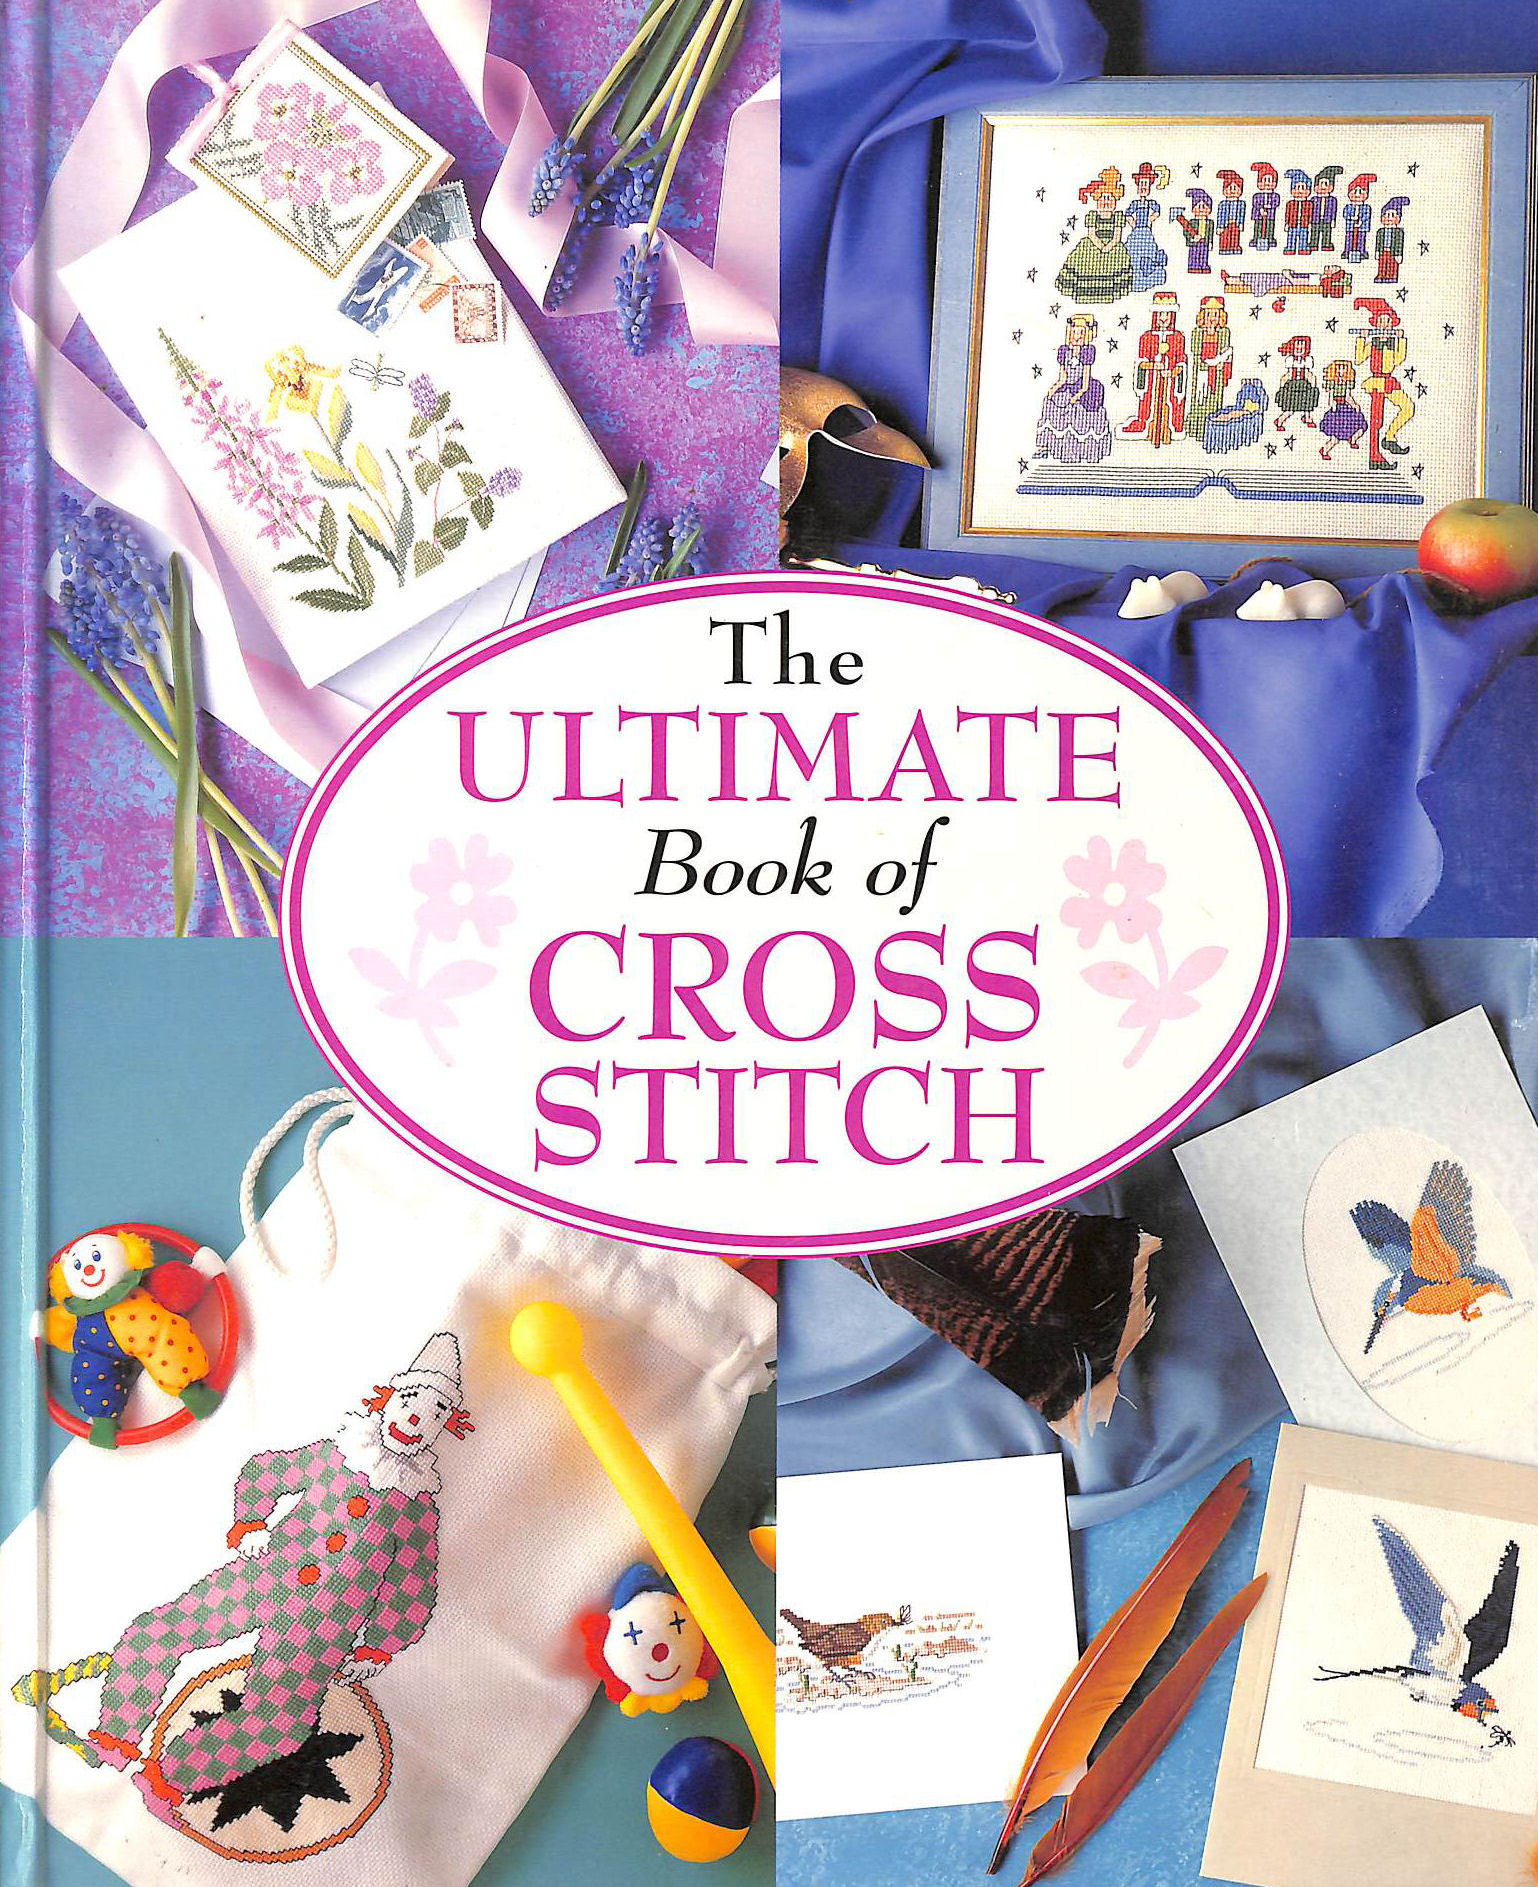 ALFORD, JANE; BEAZLEY, ANGELA; HASLER, JULIE; MARSH, CHRISTINA; PORTER, LYNNE AND WATTS, SHIRLEY - The Ultimate Book Of Cross Stitch